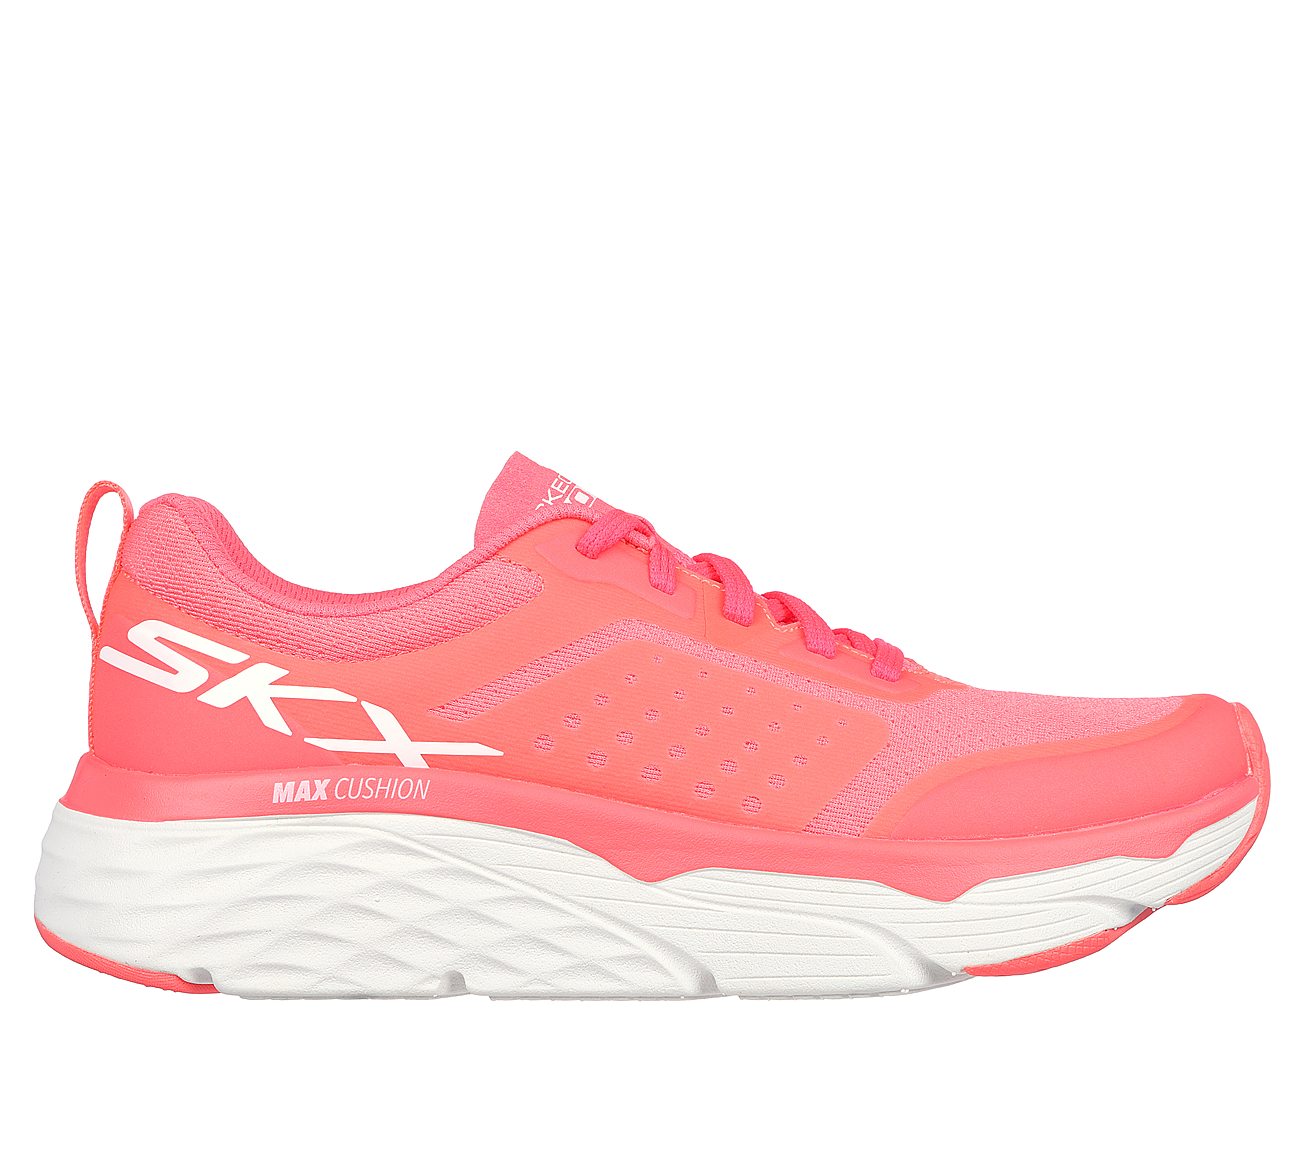 MAX CUSHIONING ELITE - INTENS, PINK/CORAL Footwear Lateral View